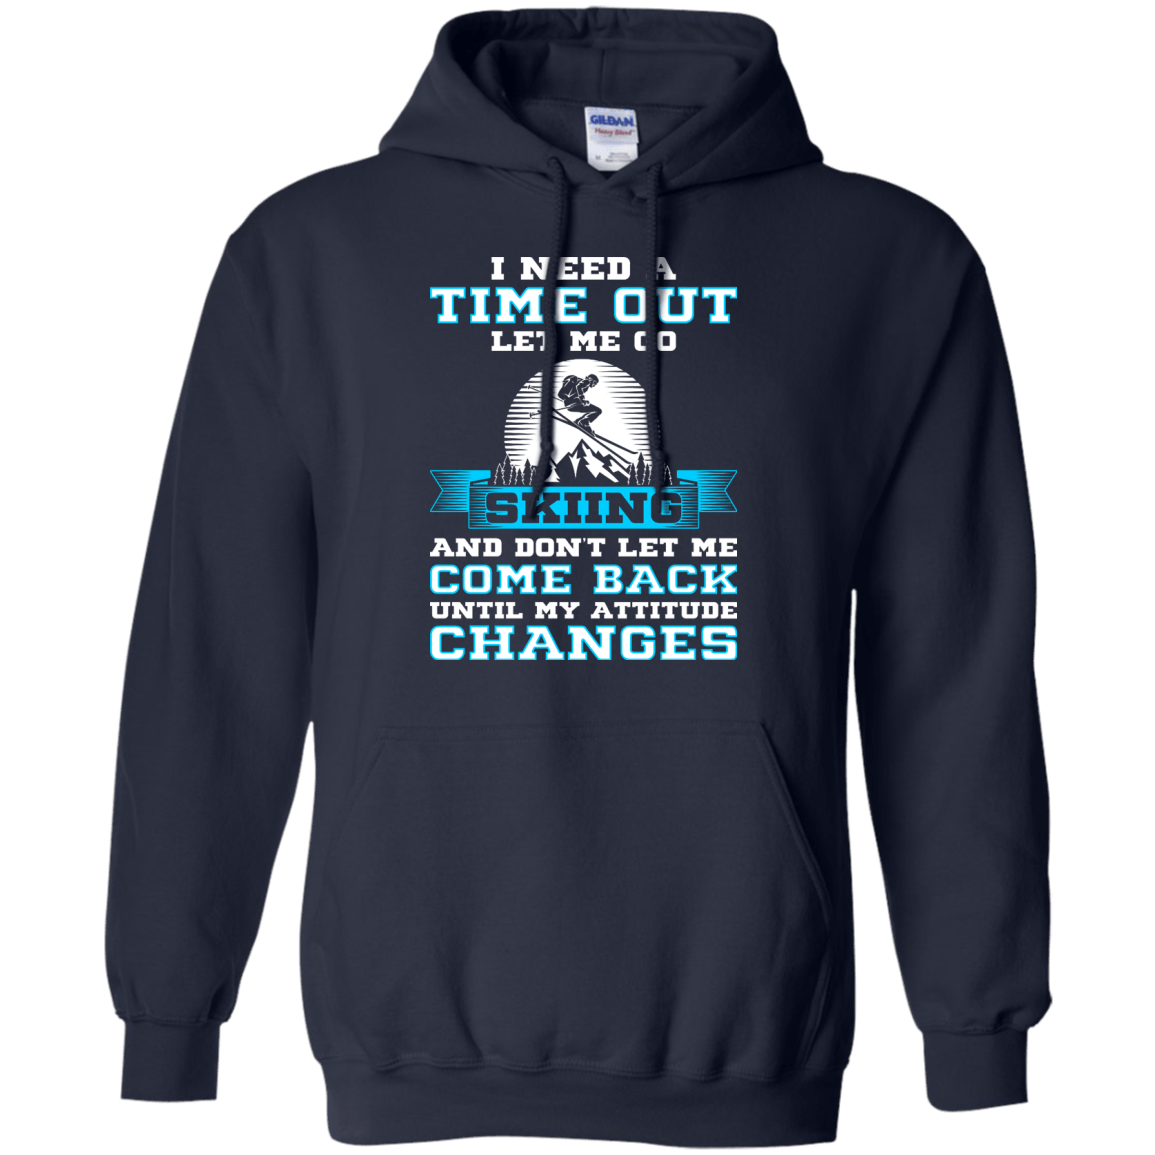 I Need A Time Out Let Me Go Skiing And Don't Let Me Come Back Until My Attitude Changes Hoodies - Powderaddicts